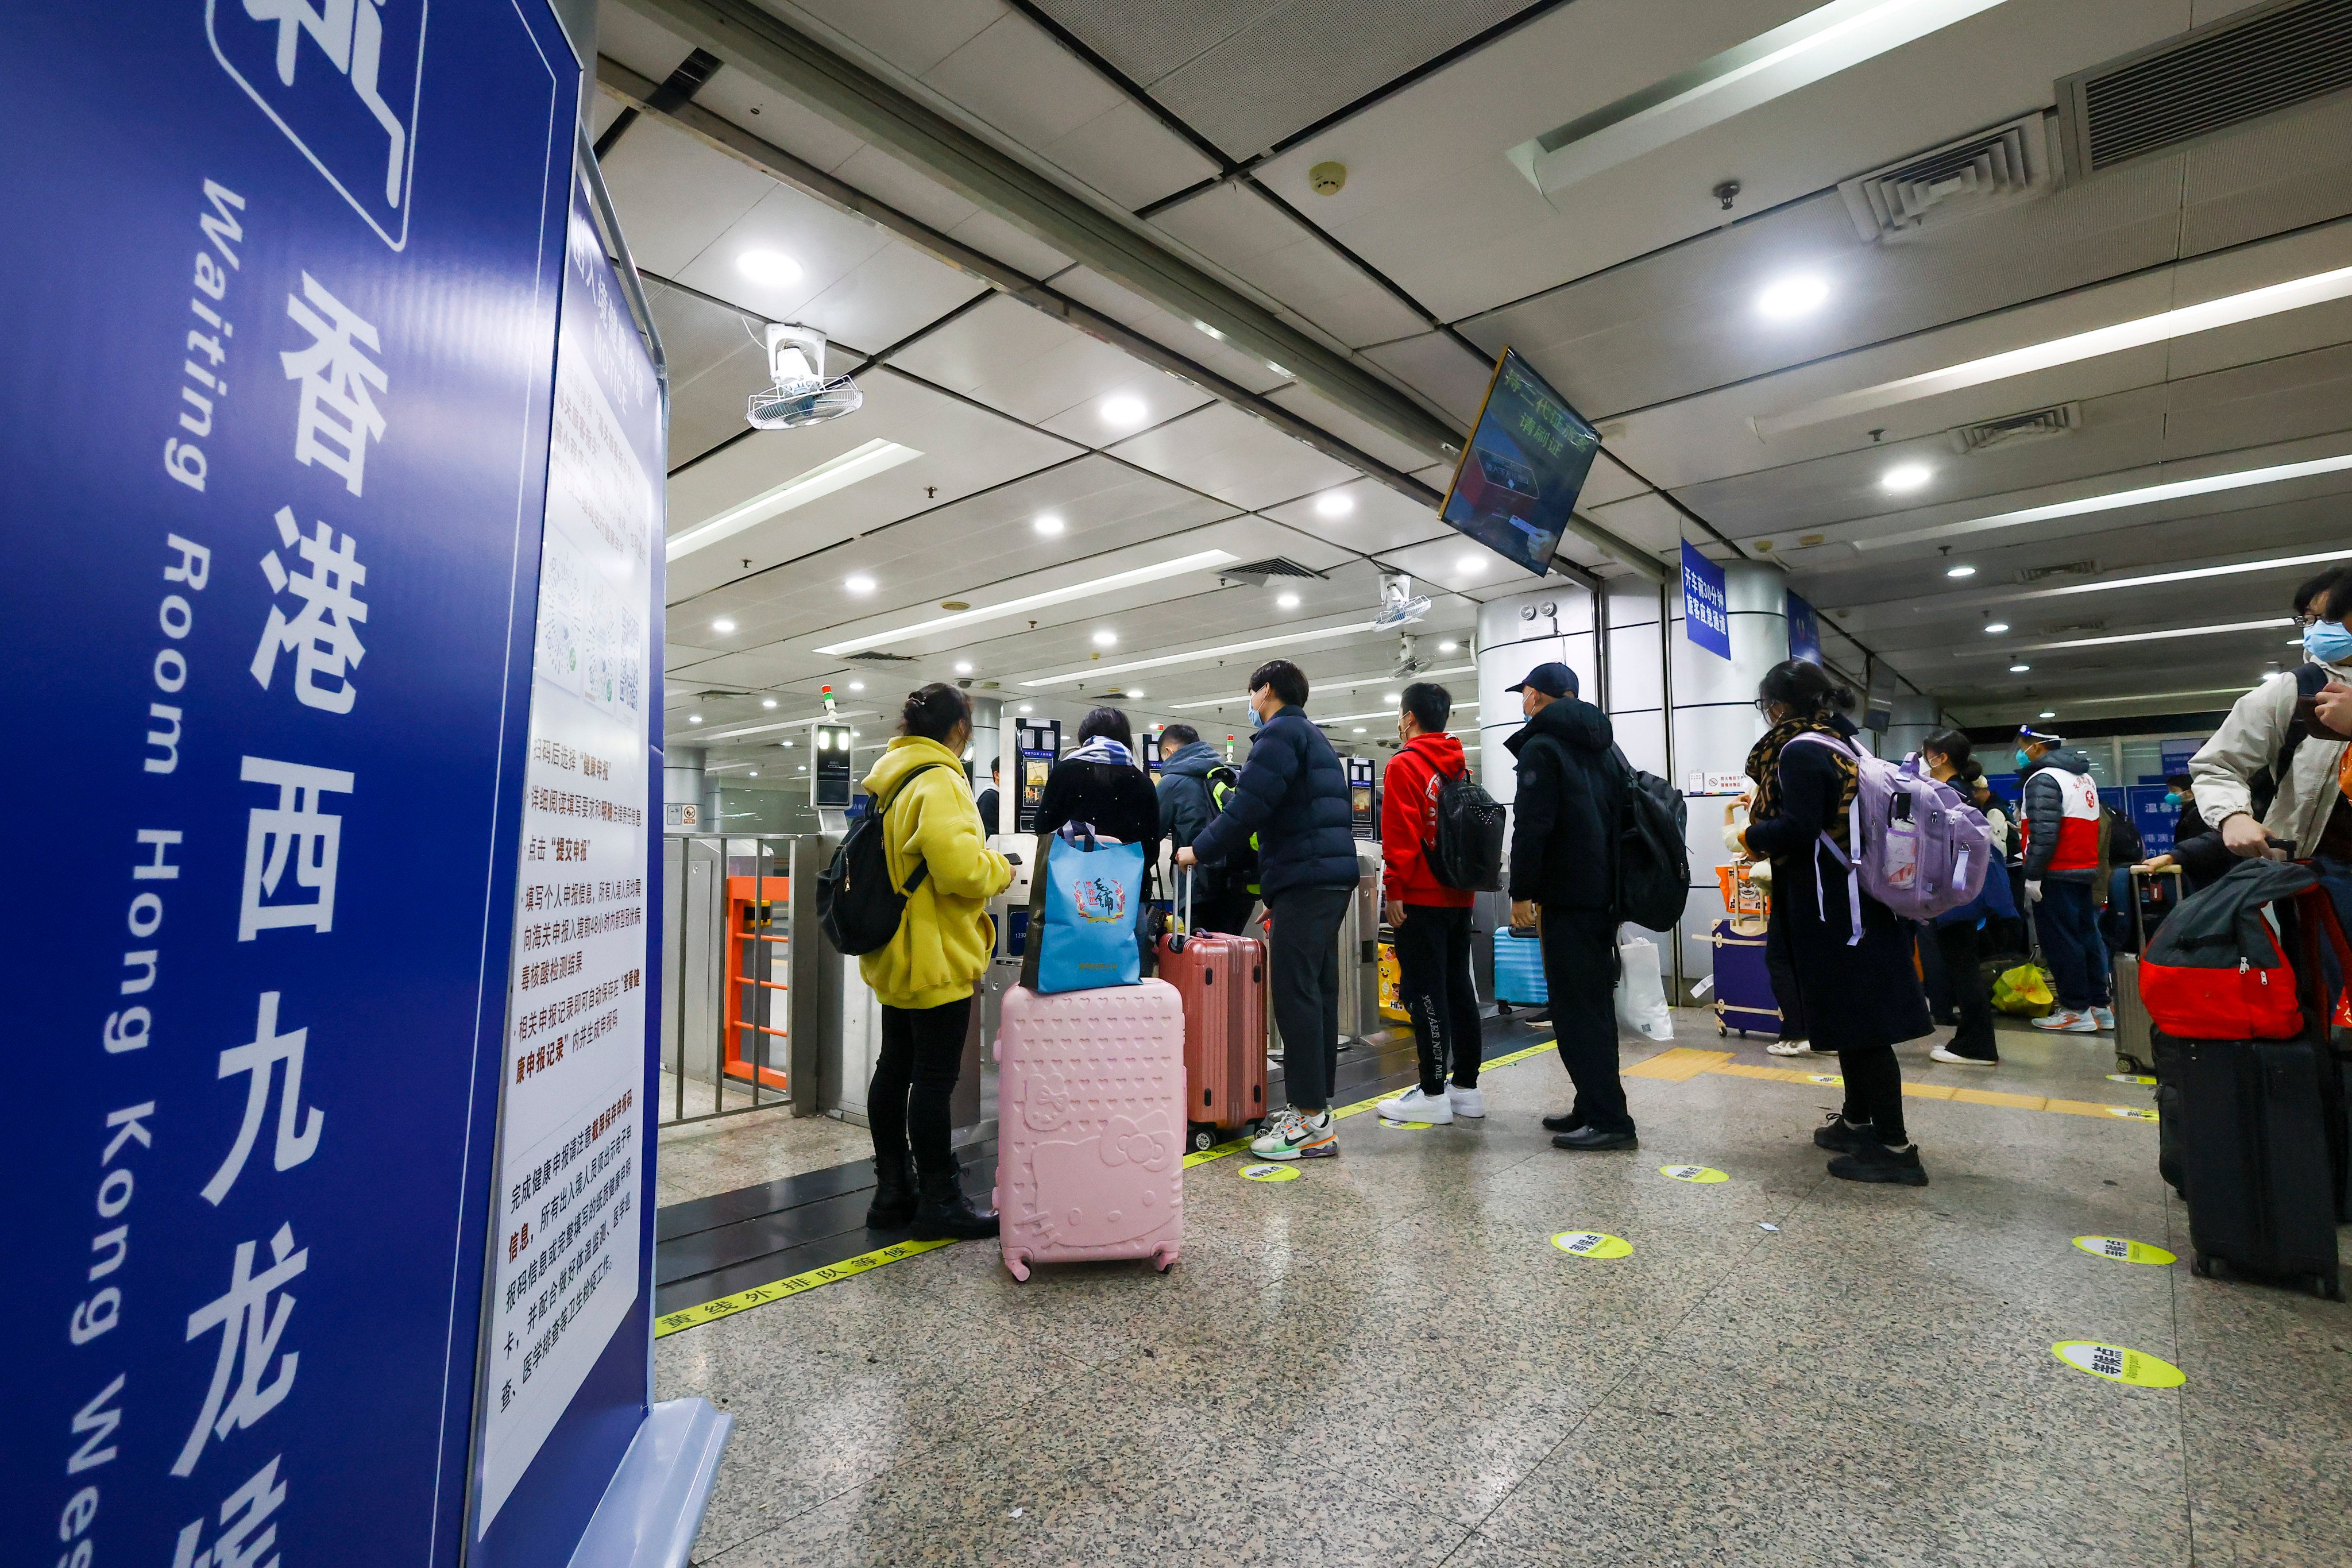 Travellers at a train station in Guangzhou wait to board a ride to Hong Kong. Photo: Dickson Lee